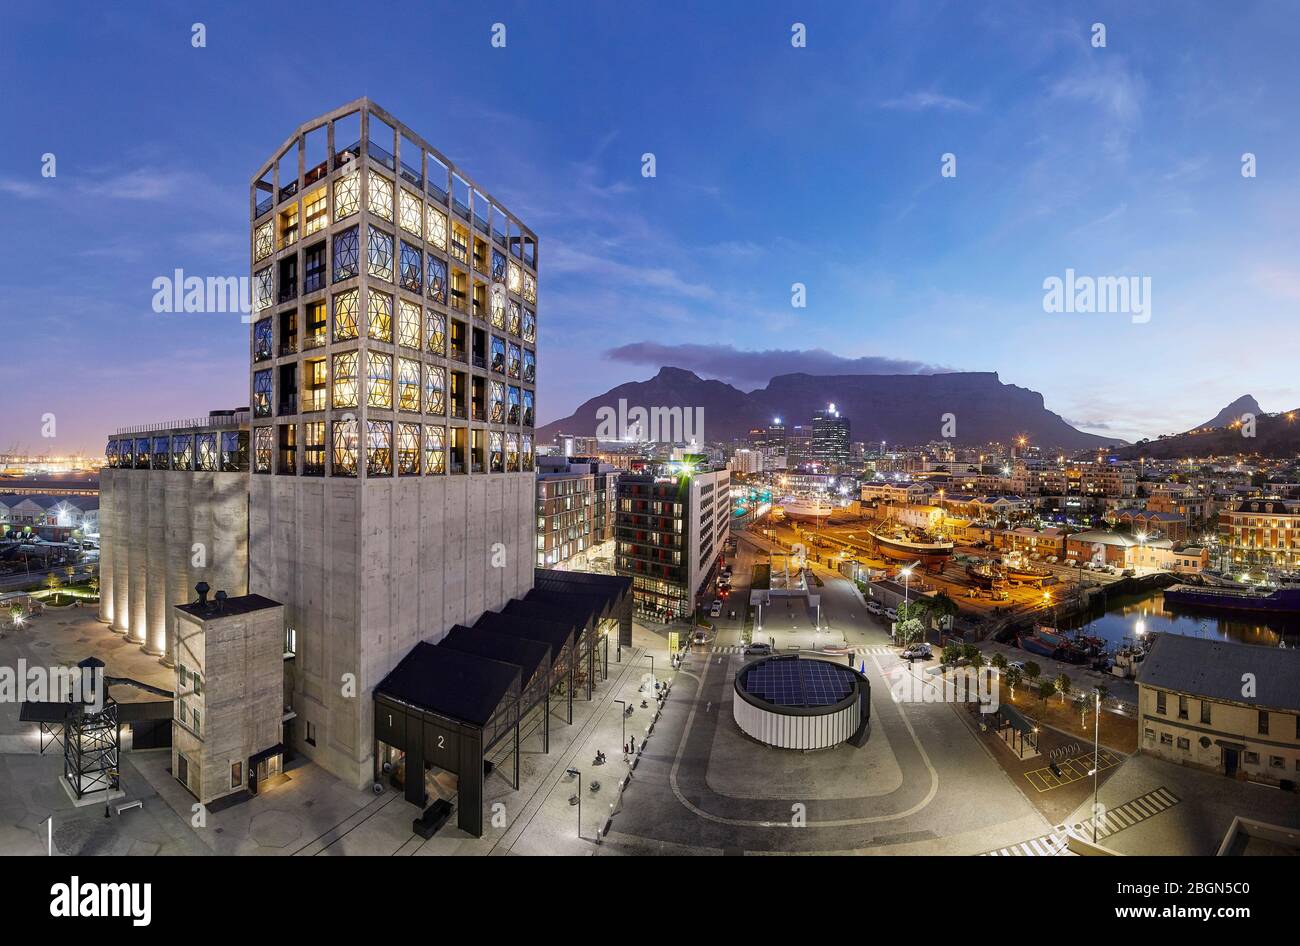 Elevated oblique view of exterior facade at dusk. Zeitz MOCAA, Cape Town, South Africa. Architect: Heatherwick Studio, 2017. Stock Photo